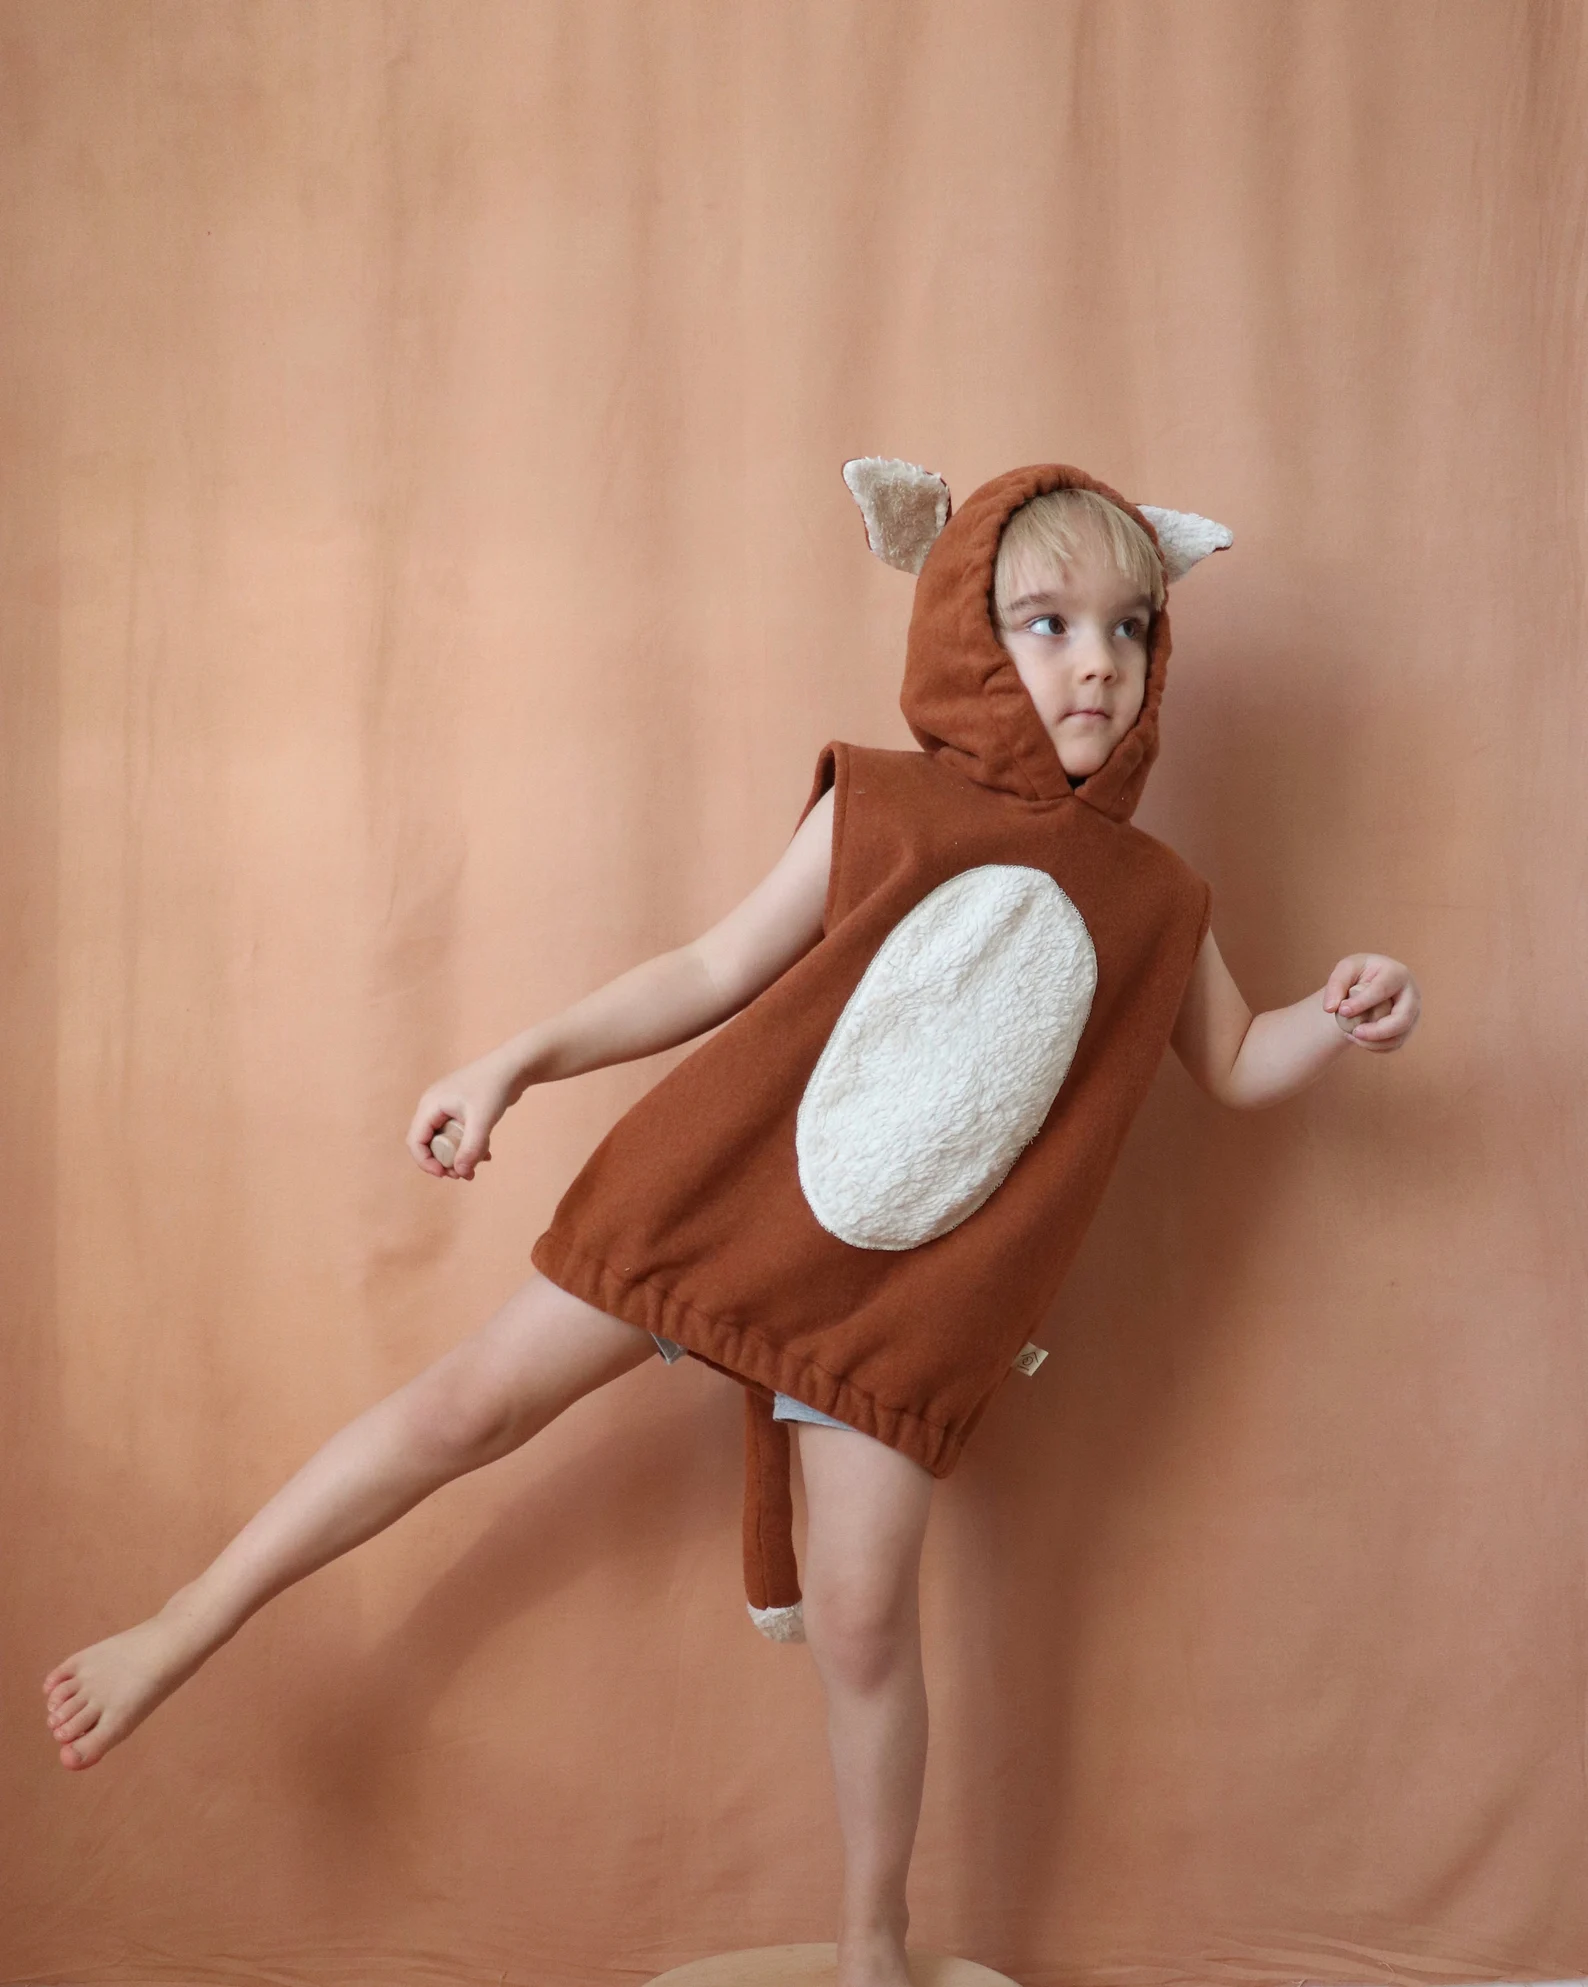 non toxic organic halloween costume from etsy